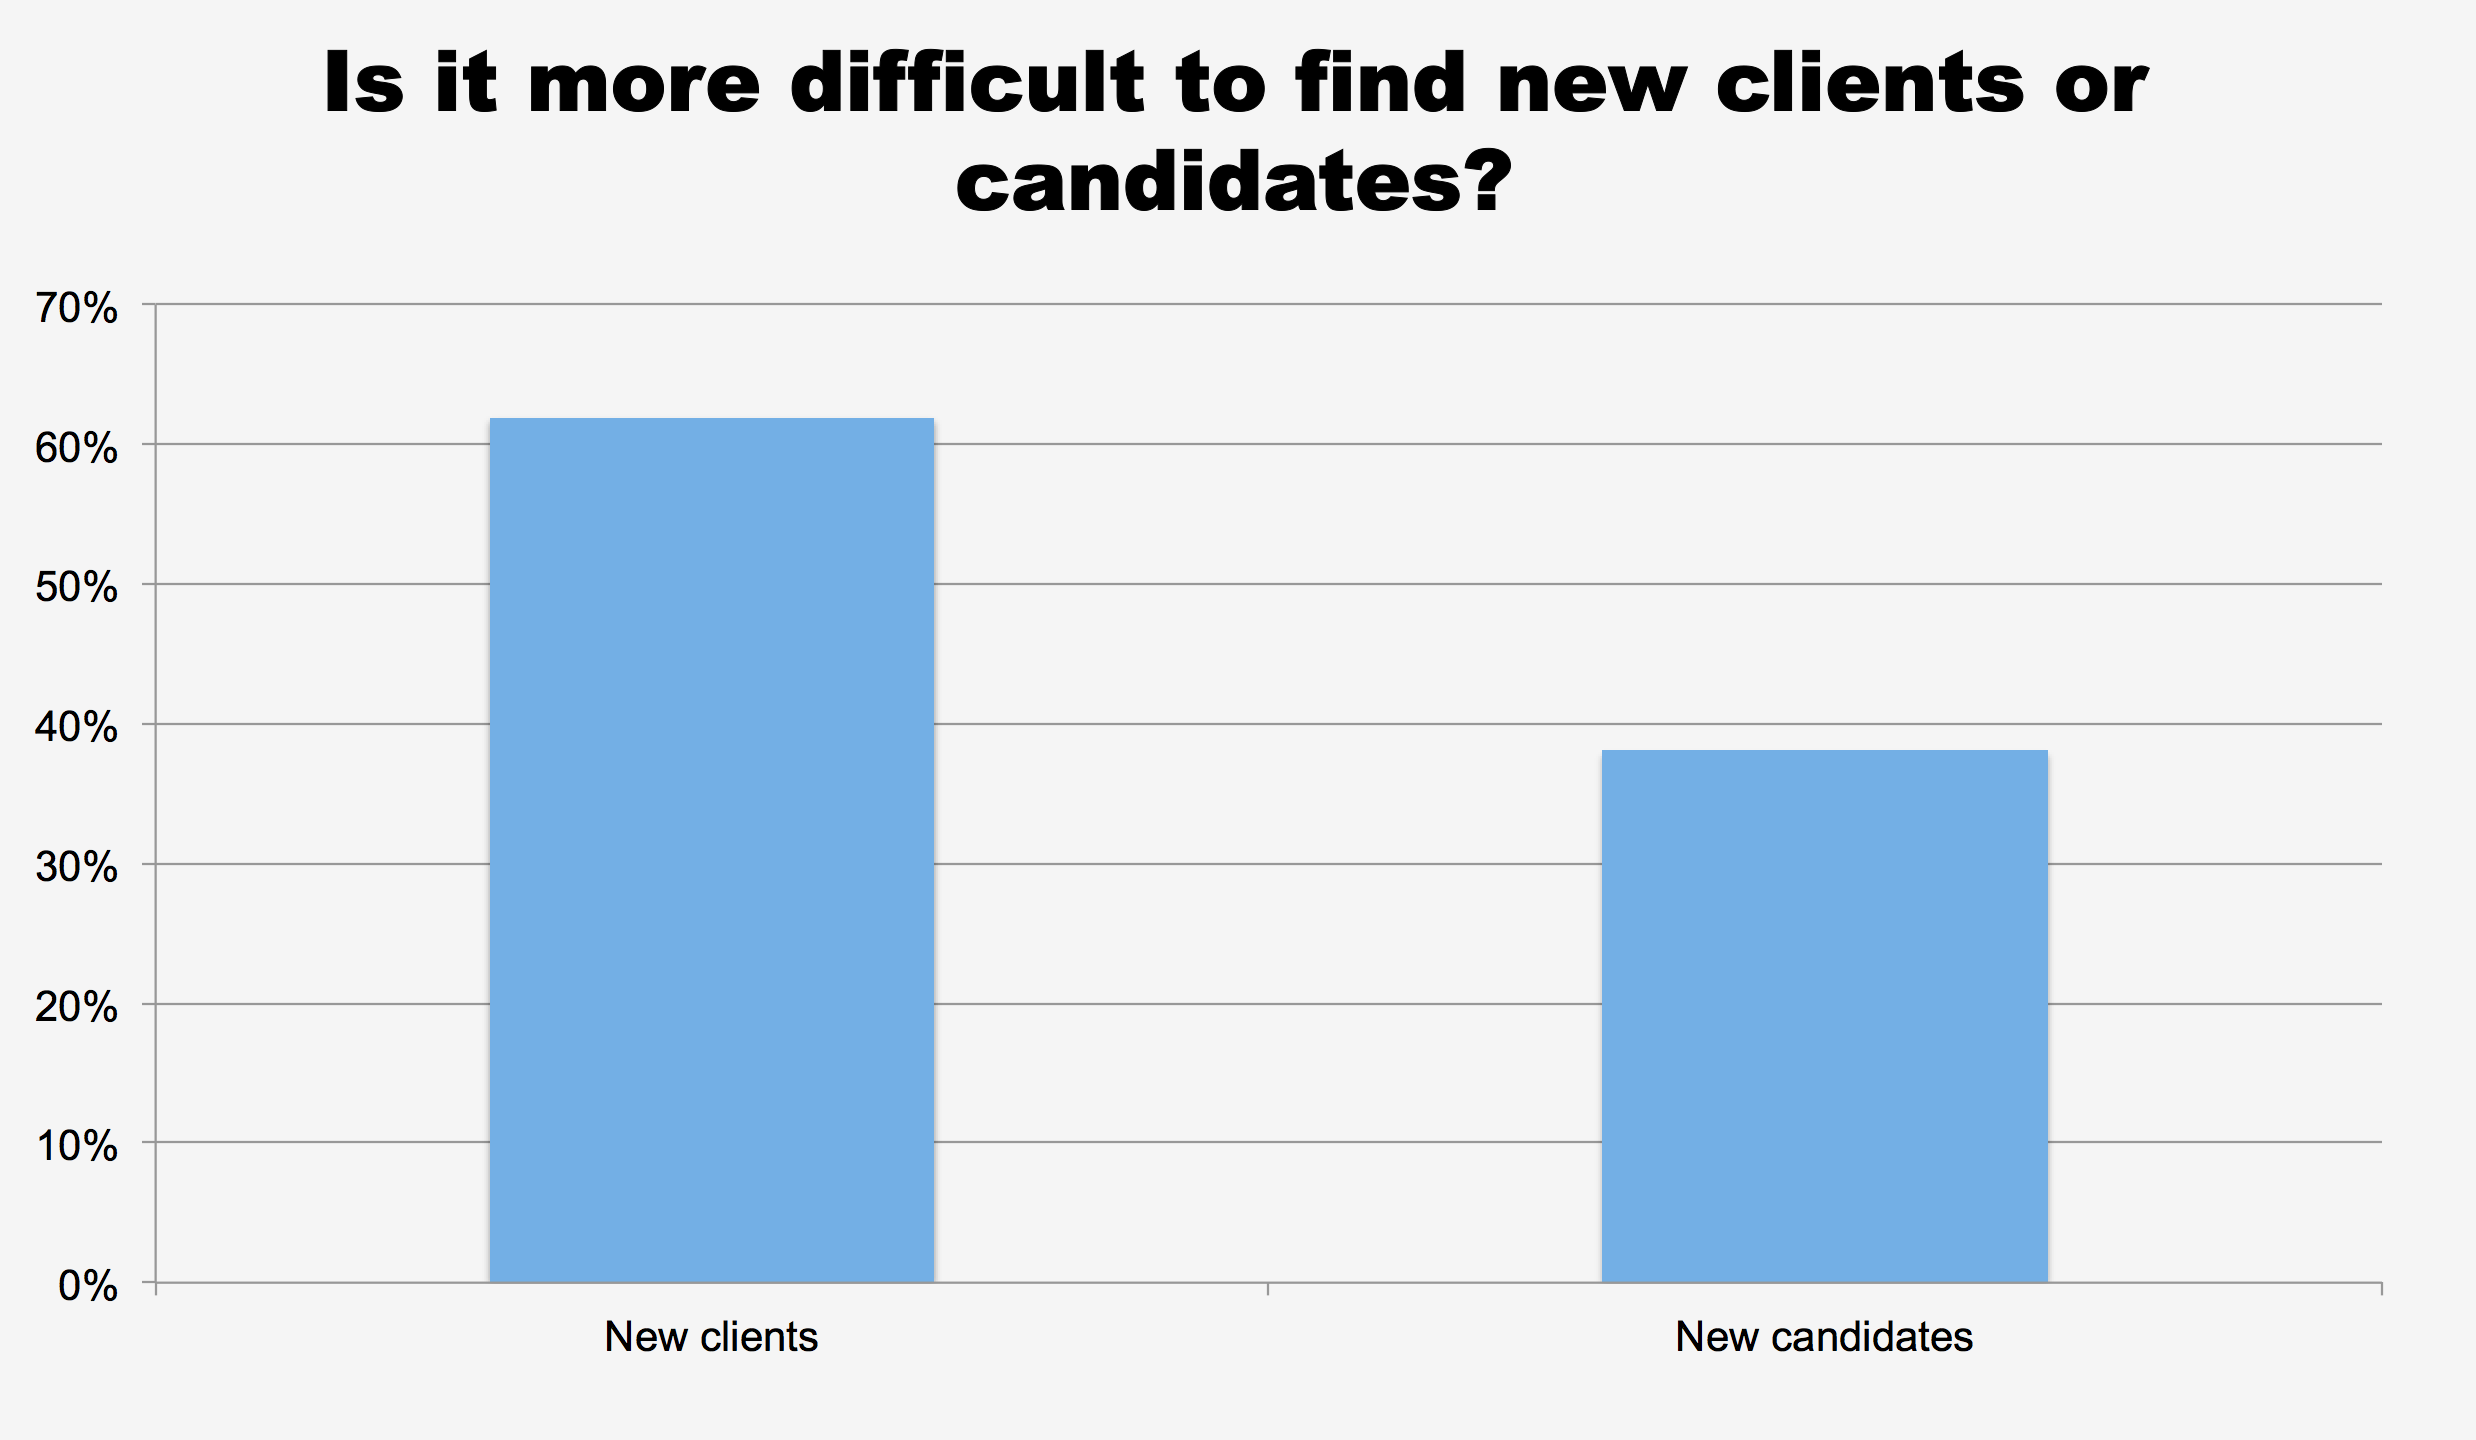 Is it more difficult to find new clients or candidates?